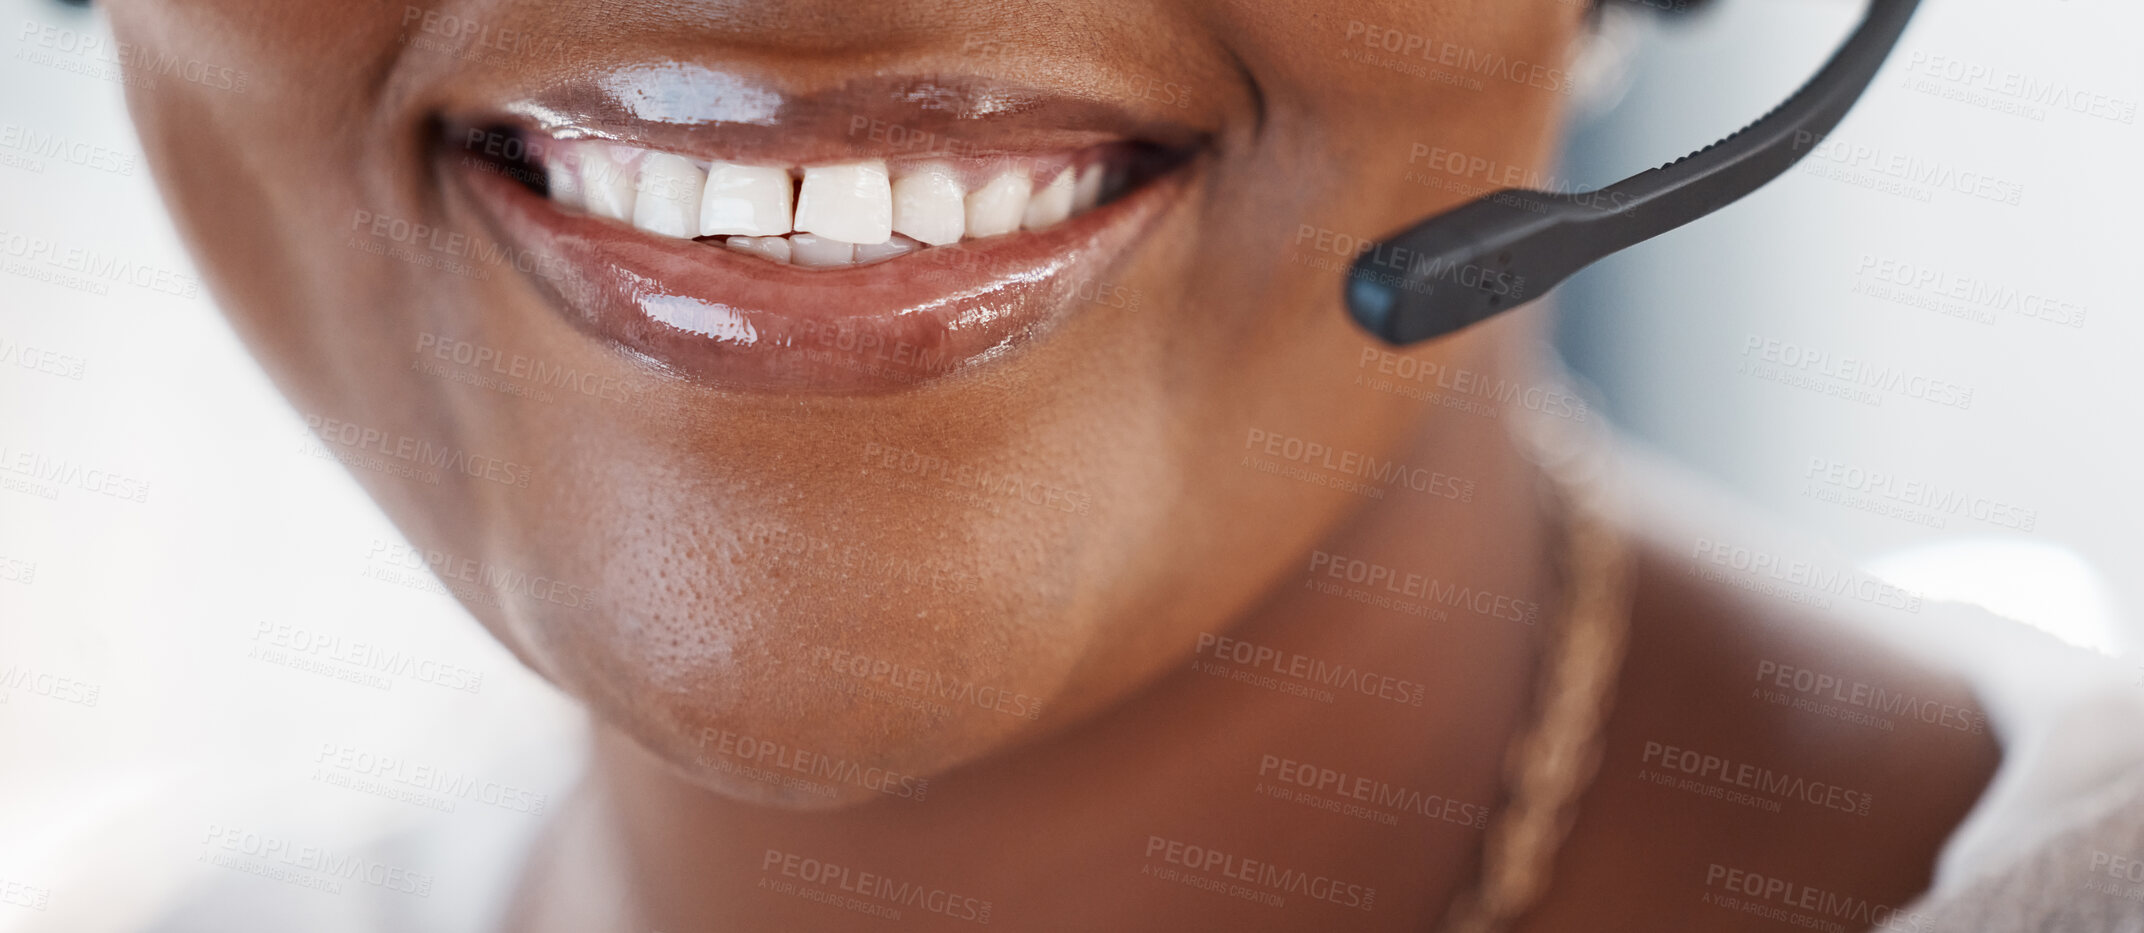 Buy stock photo Call center, microphone and mouth of a woman agent for telemarketing, sales or crm work. Smile of a woman consultant with a headset for customer service, contact us and help desk support or advice